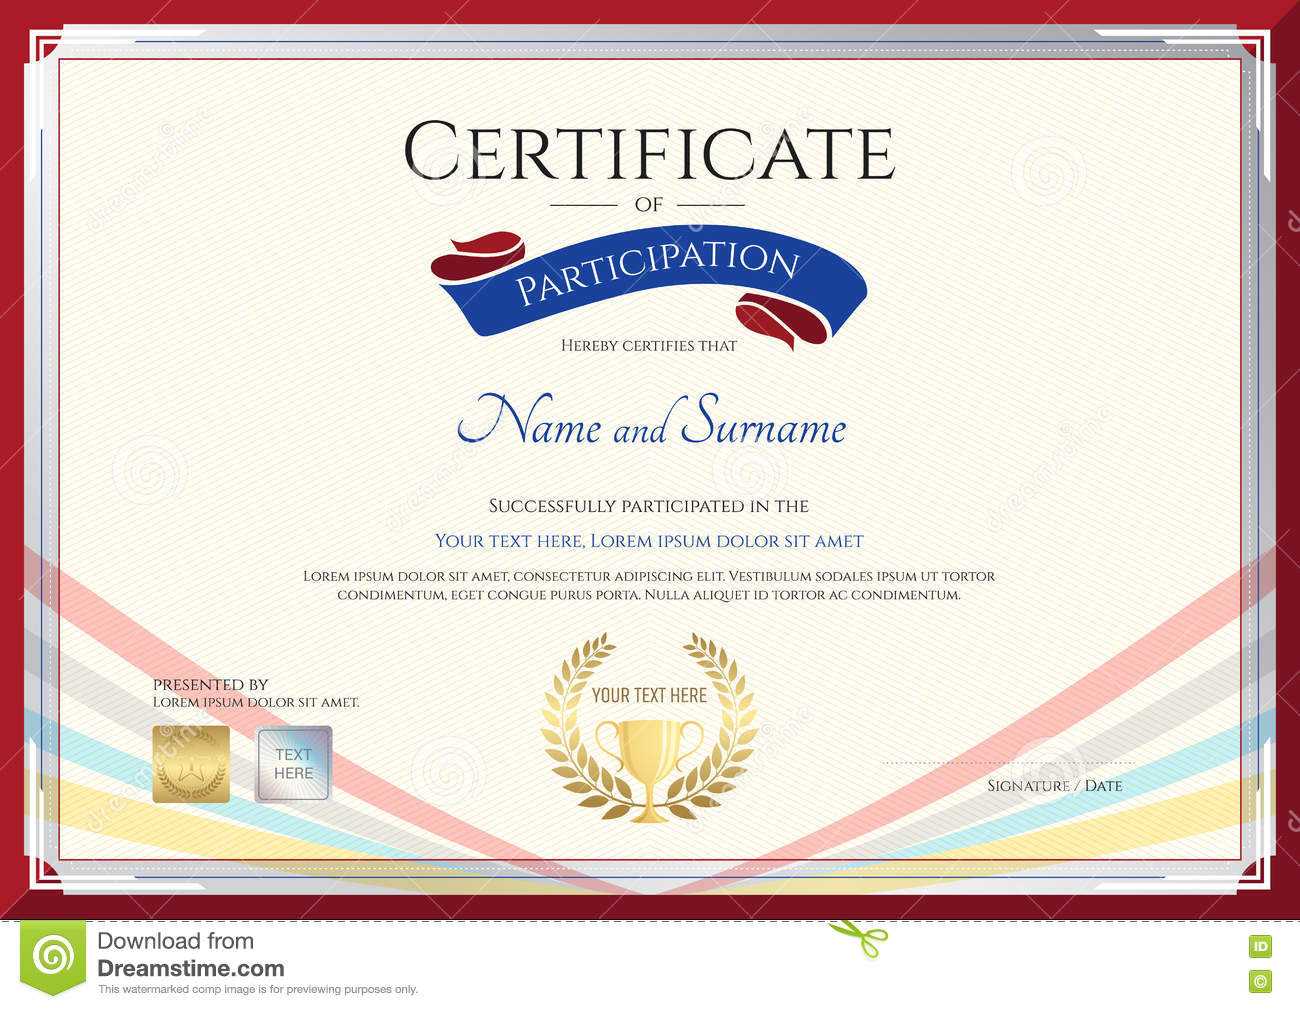 Certificate Template For Achievement, Appreciation Or Intended For Certification Of Participation Free Template